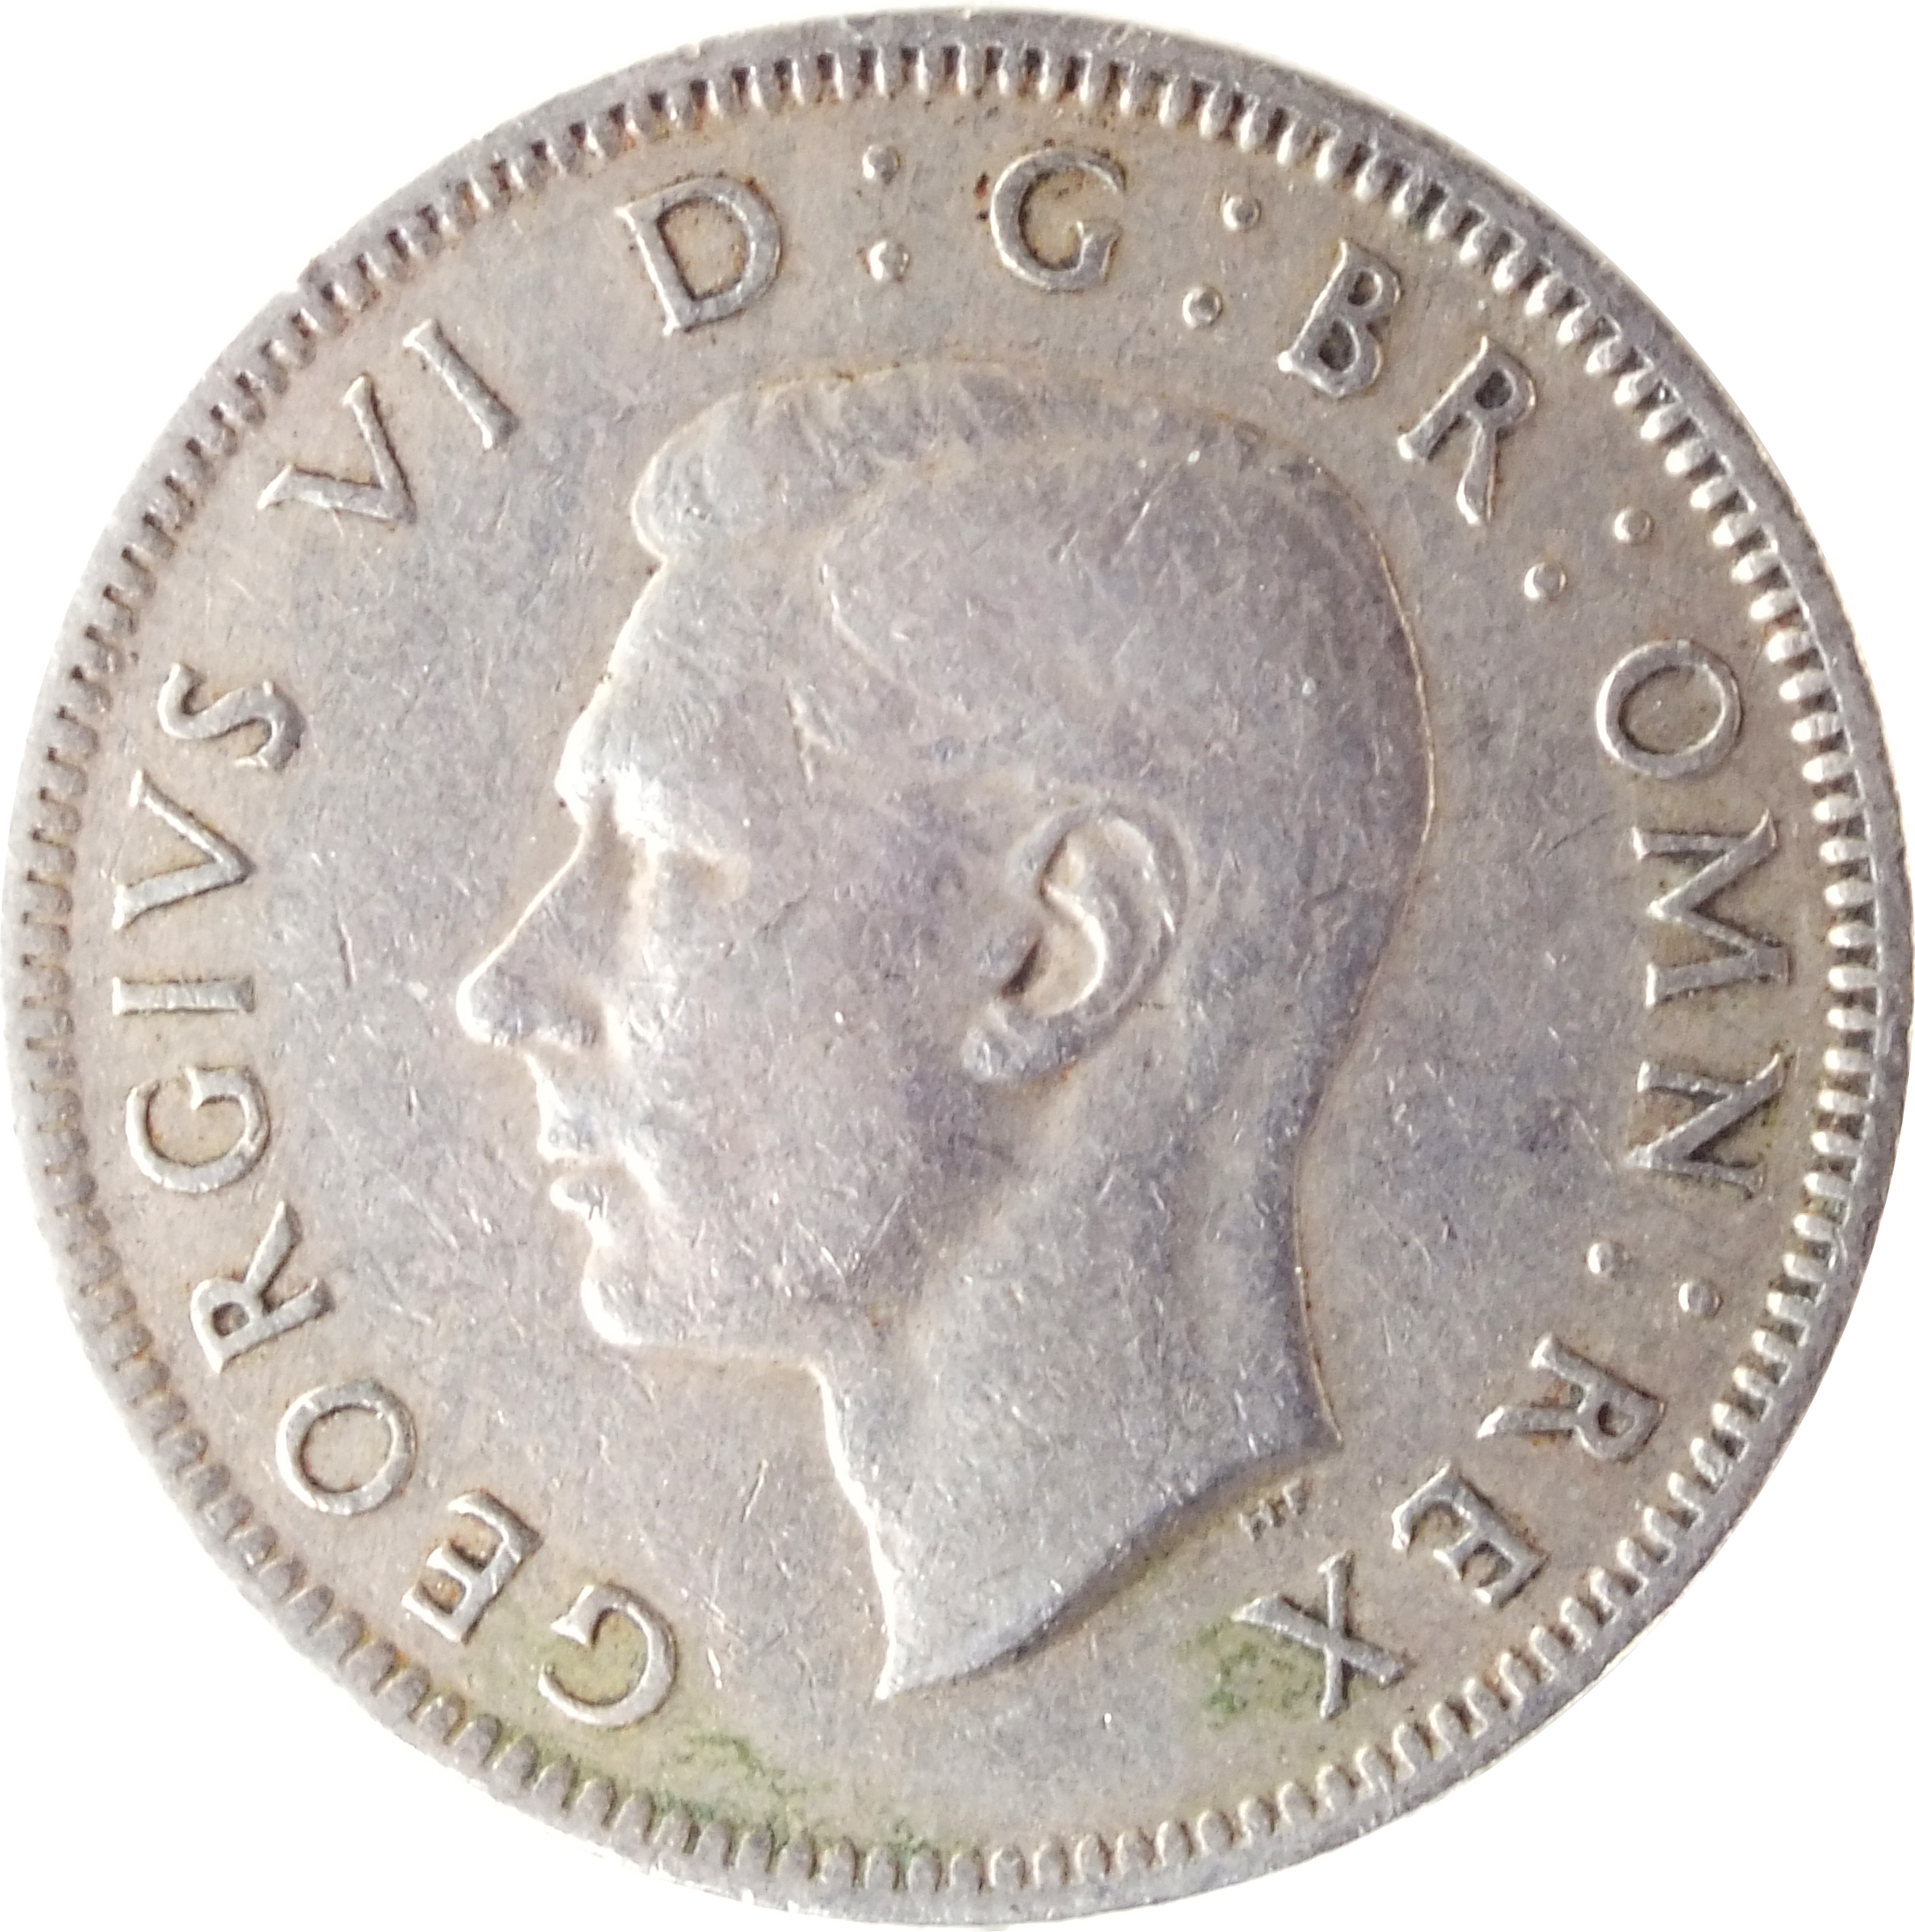 1 Shilling - George VI - English With IND:IMP (1947-1948) United Kingdom KM# 863 CoinsBook